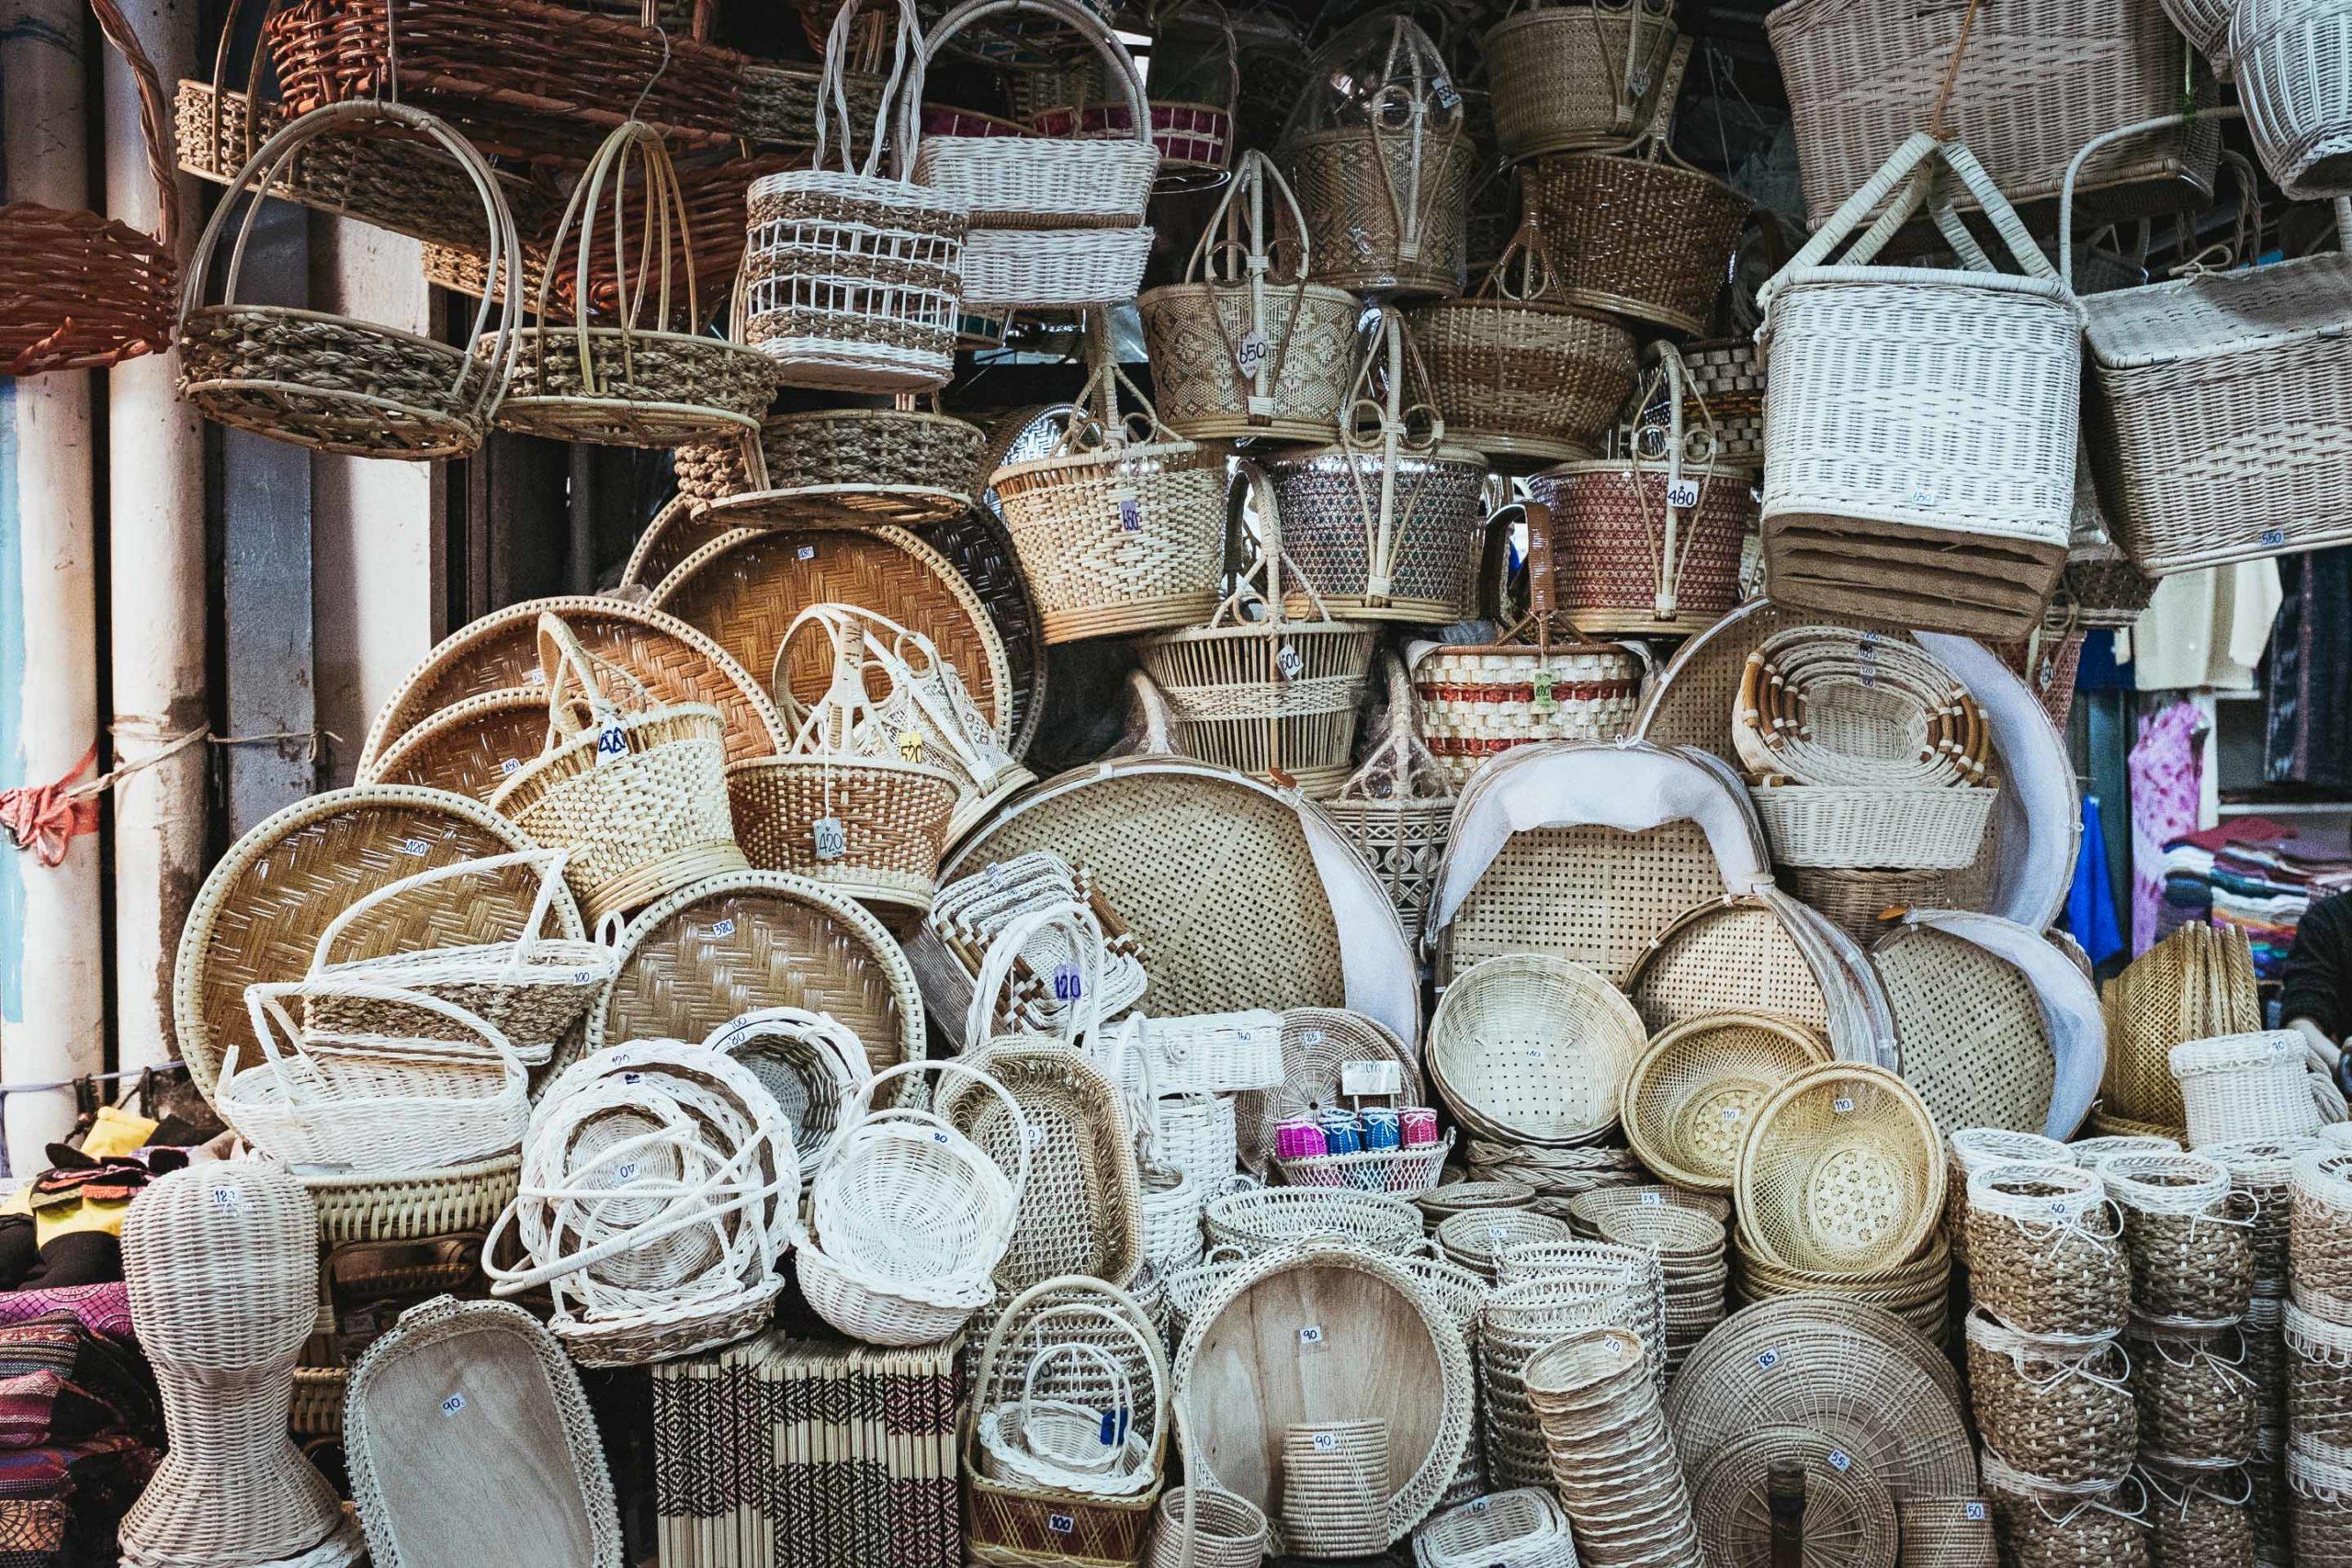 This image shows one of a series of photos taken in Chiang Mai, Warorot Market.